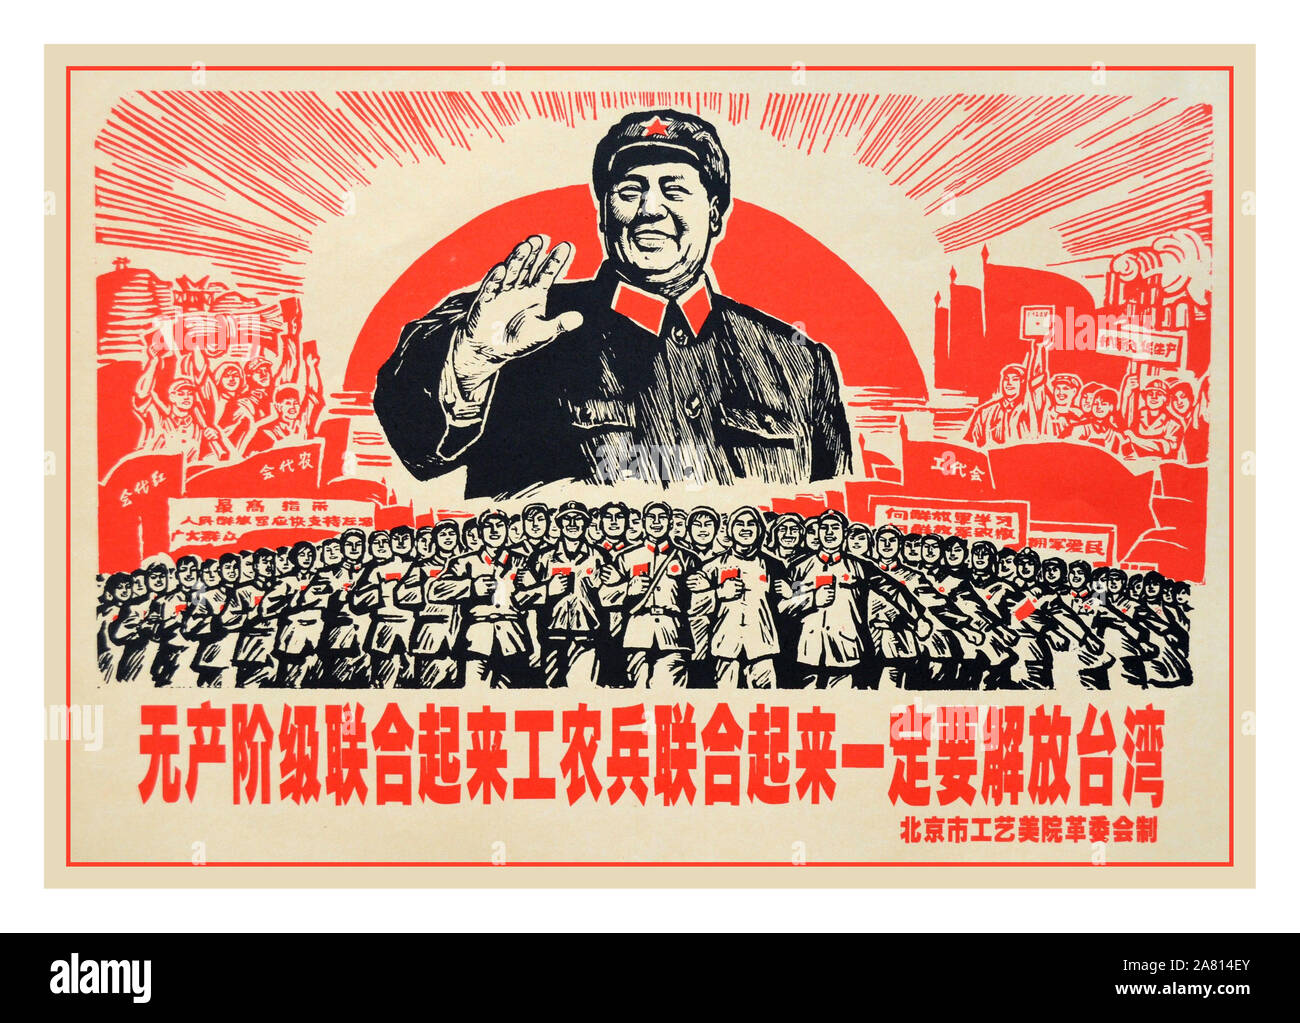 Vintage 1950's Chairman Mao Propaganda Poster, captioned 'THE PROLETARIAT UNITE,WORKERS, PEASANTS AND SOLDIERS UNITE TO LIBERATE TAIWAN'  People's Republic of China (PRC),Cultural Revolution China Culture History Vintage Posters Communist Propaganda Poster Illustrations Stock Photo